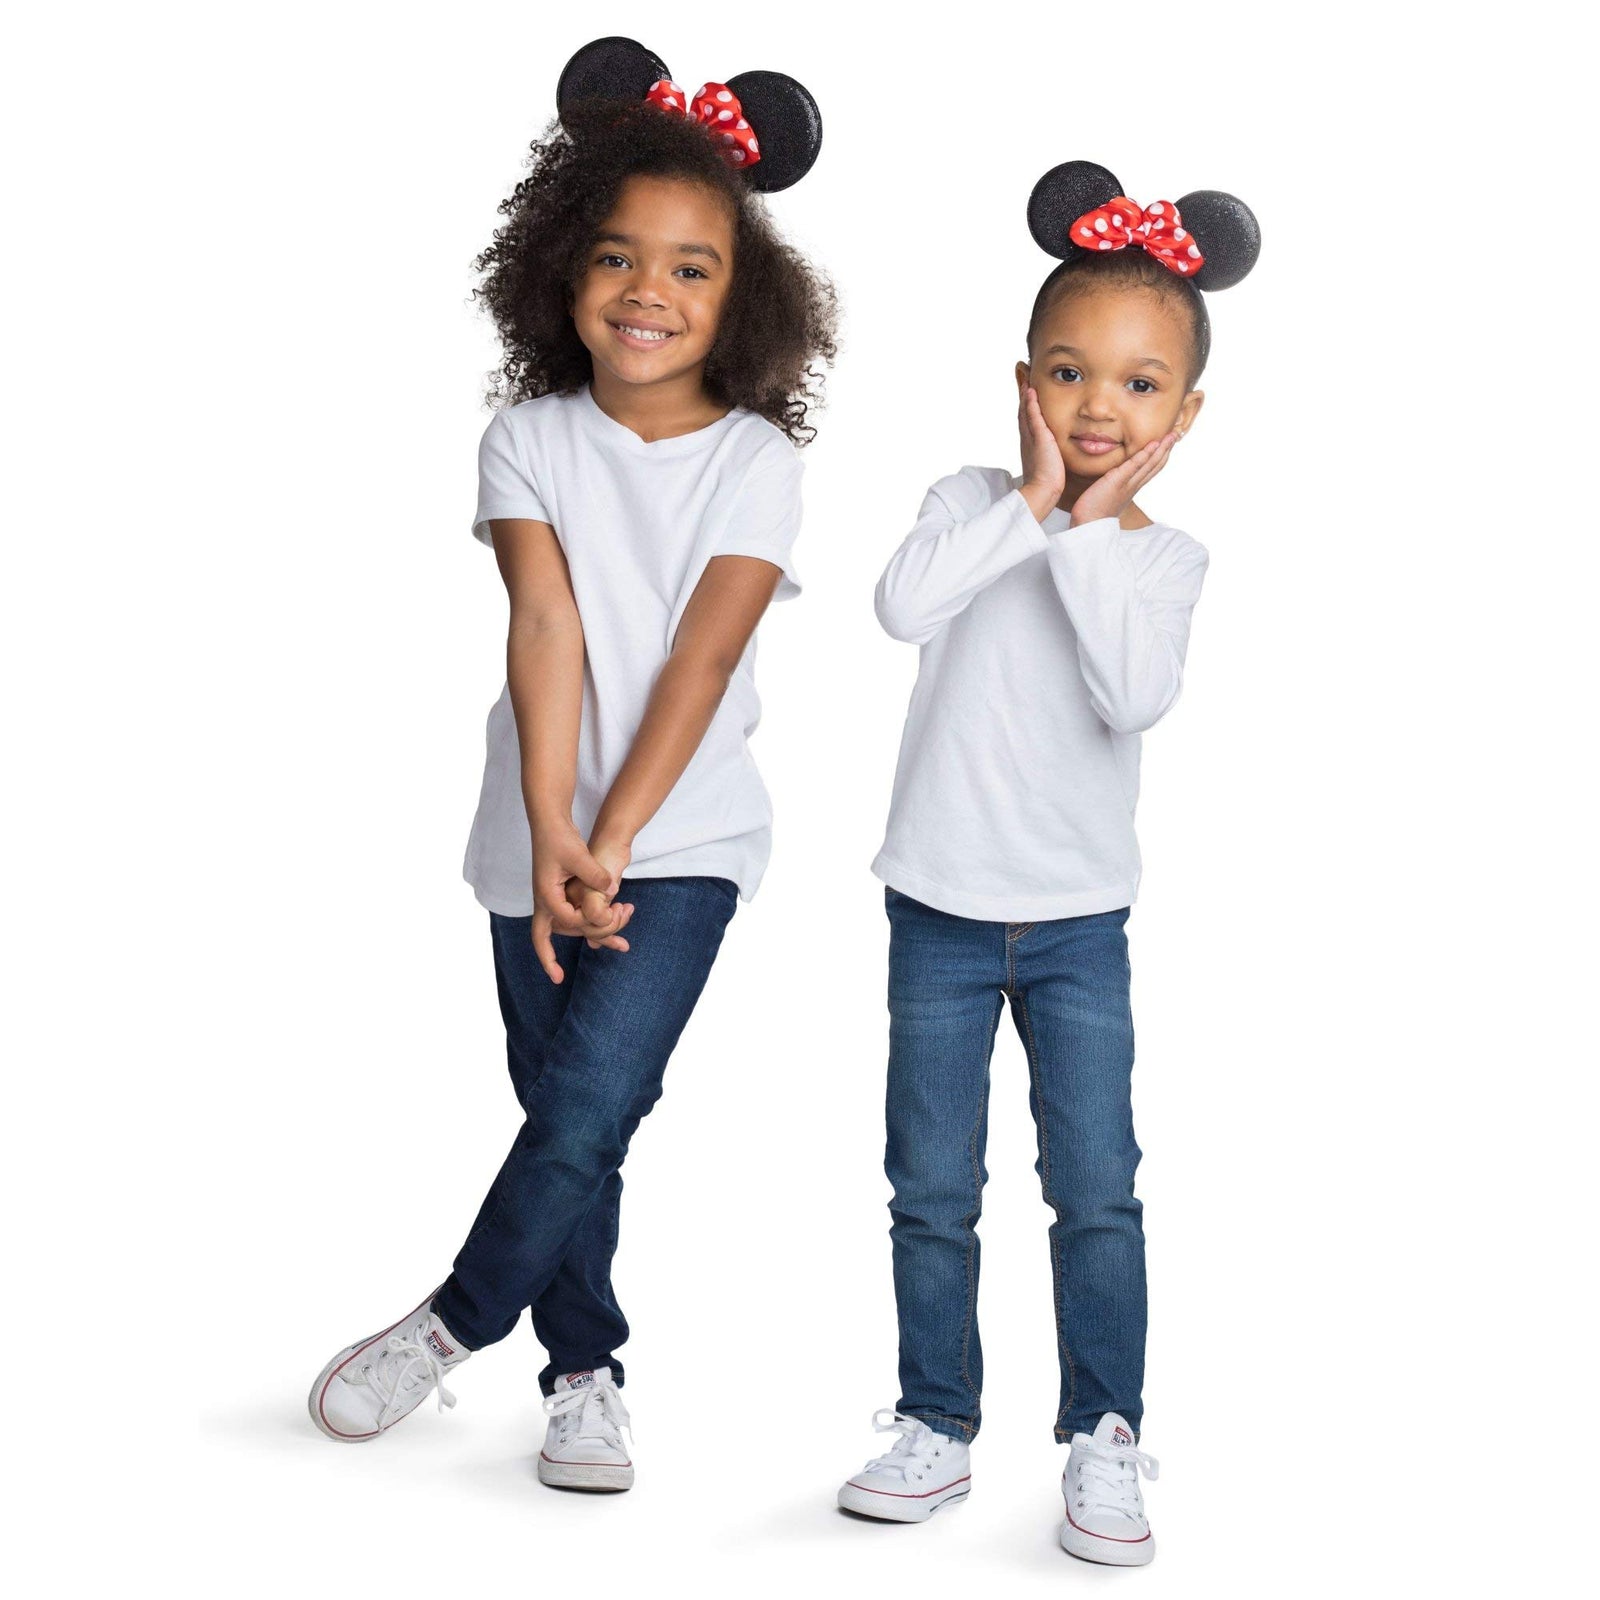 Disney Minnie Mouse Ears, Set of 2 Headbands for Mommy and Me, Matching for Adult and Little Girl